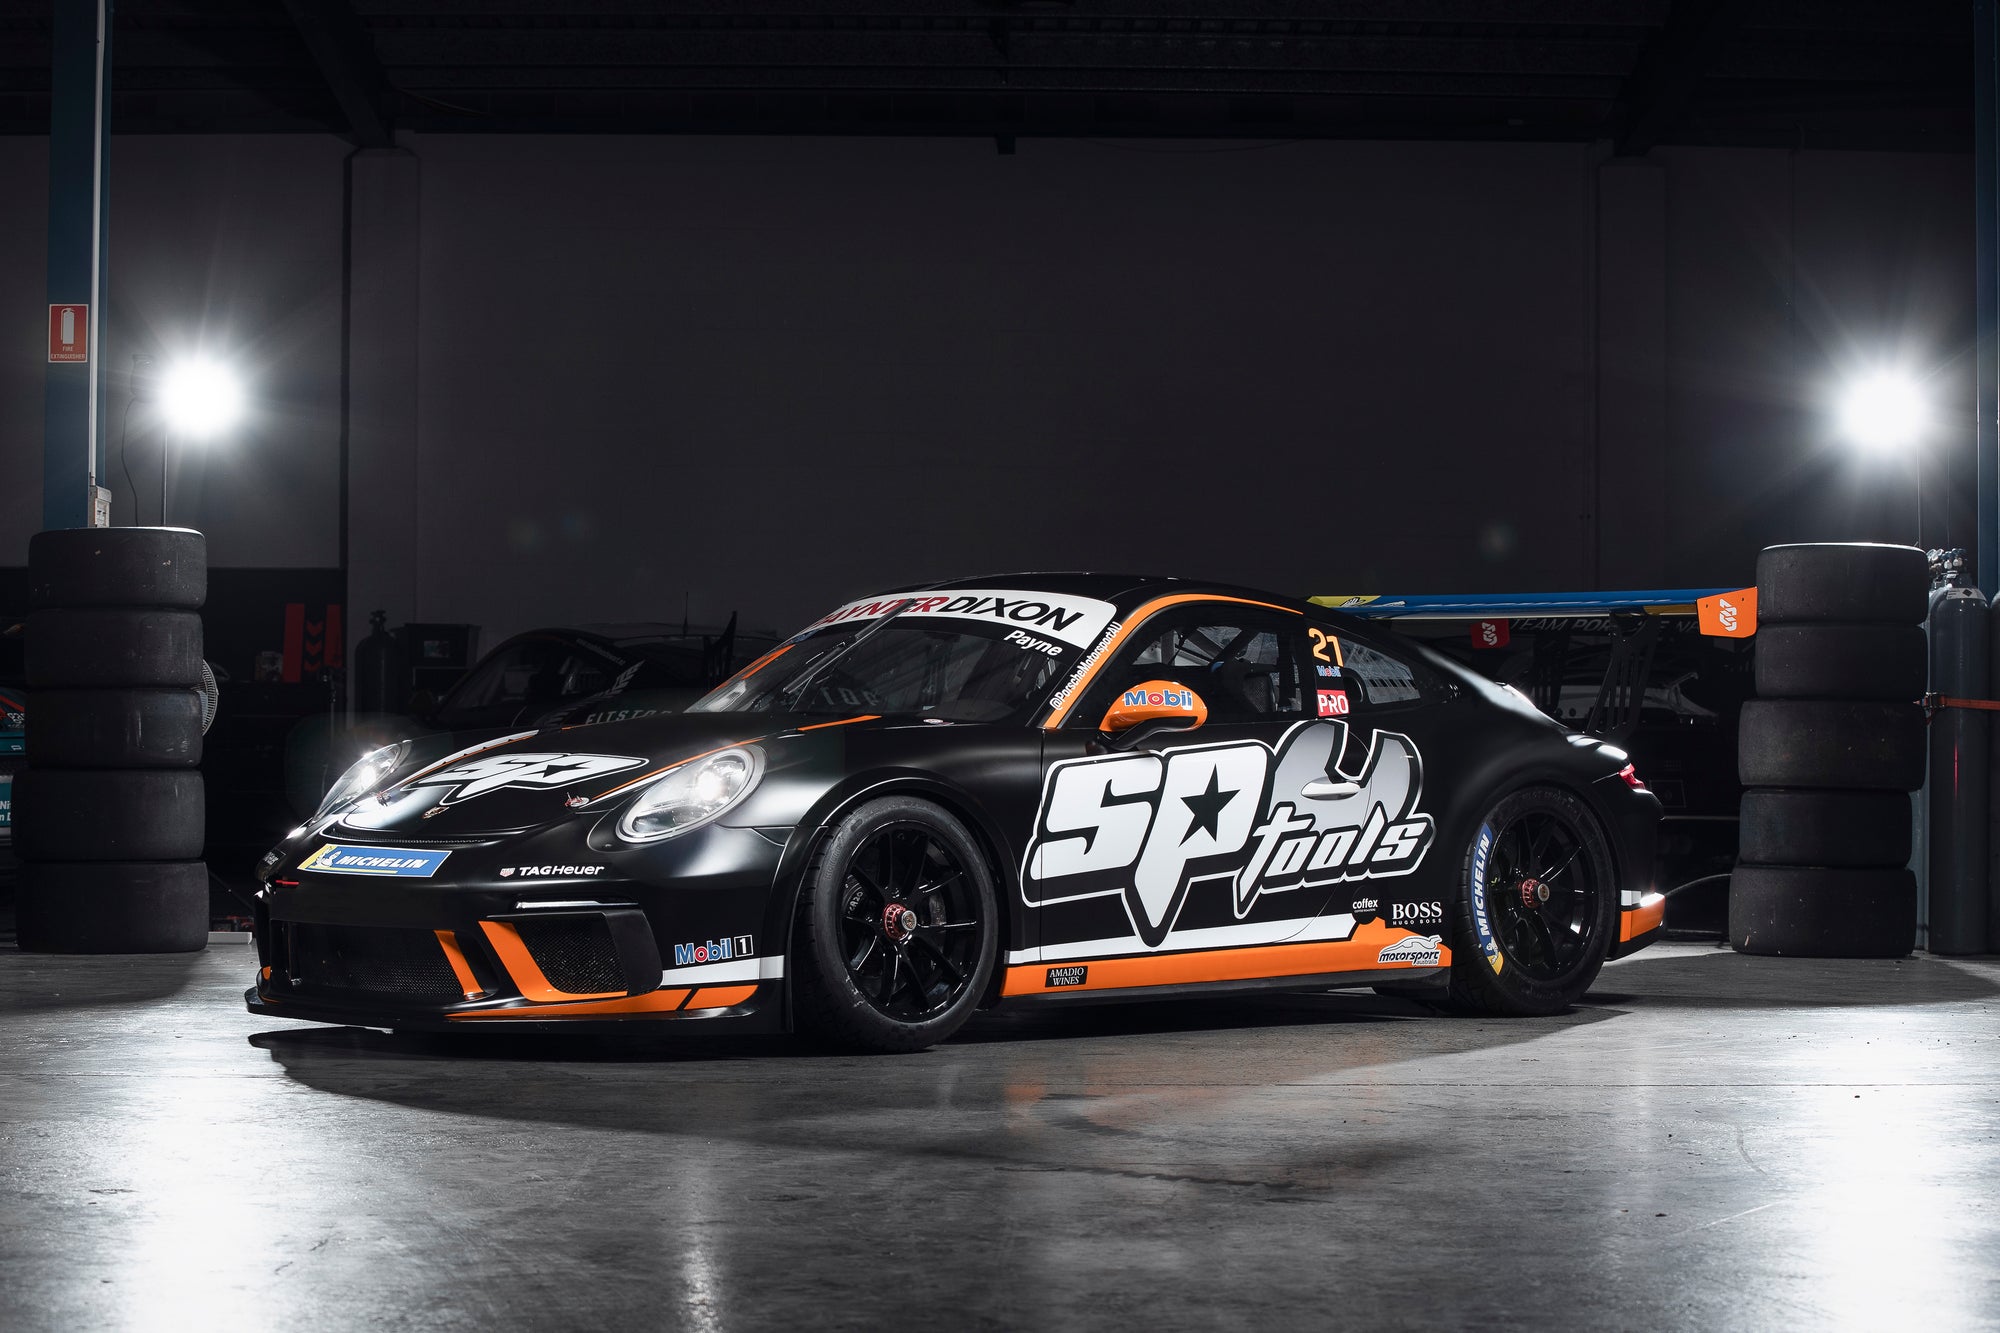 SP Tools USA Joins Premier Porsche One-Make Series with Team Award and More